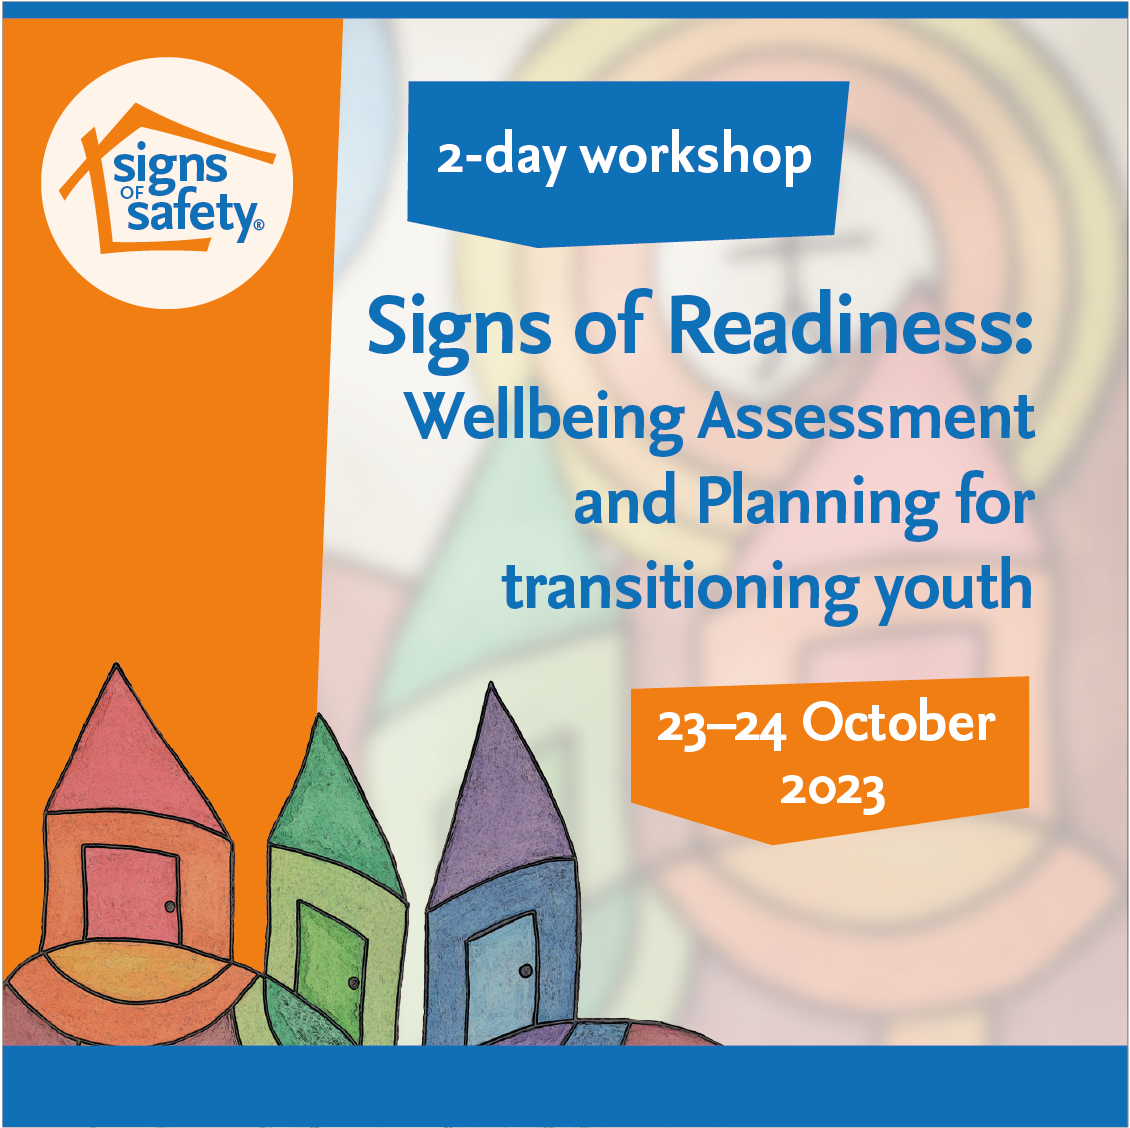 Signs of Readiness: Wellbeing Assessment and Planning for transitioning youth